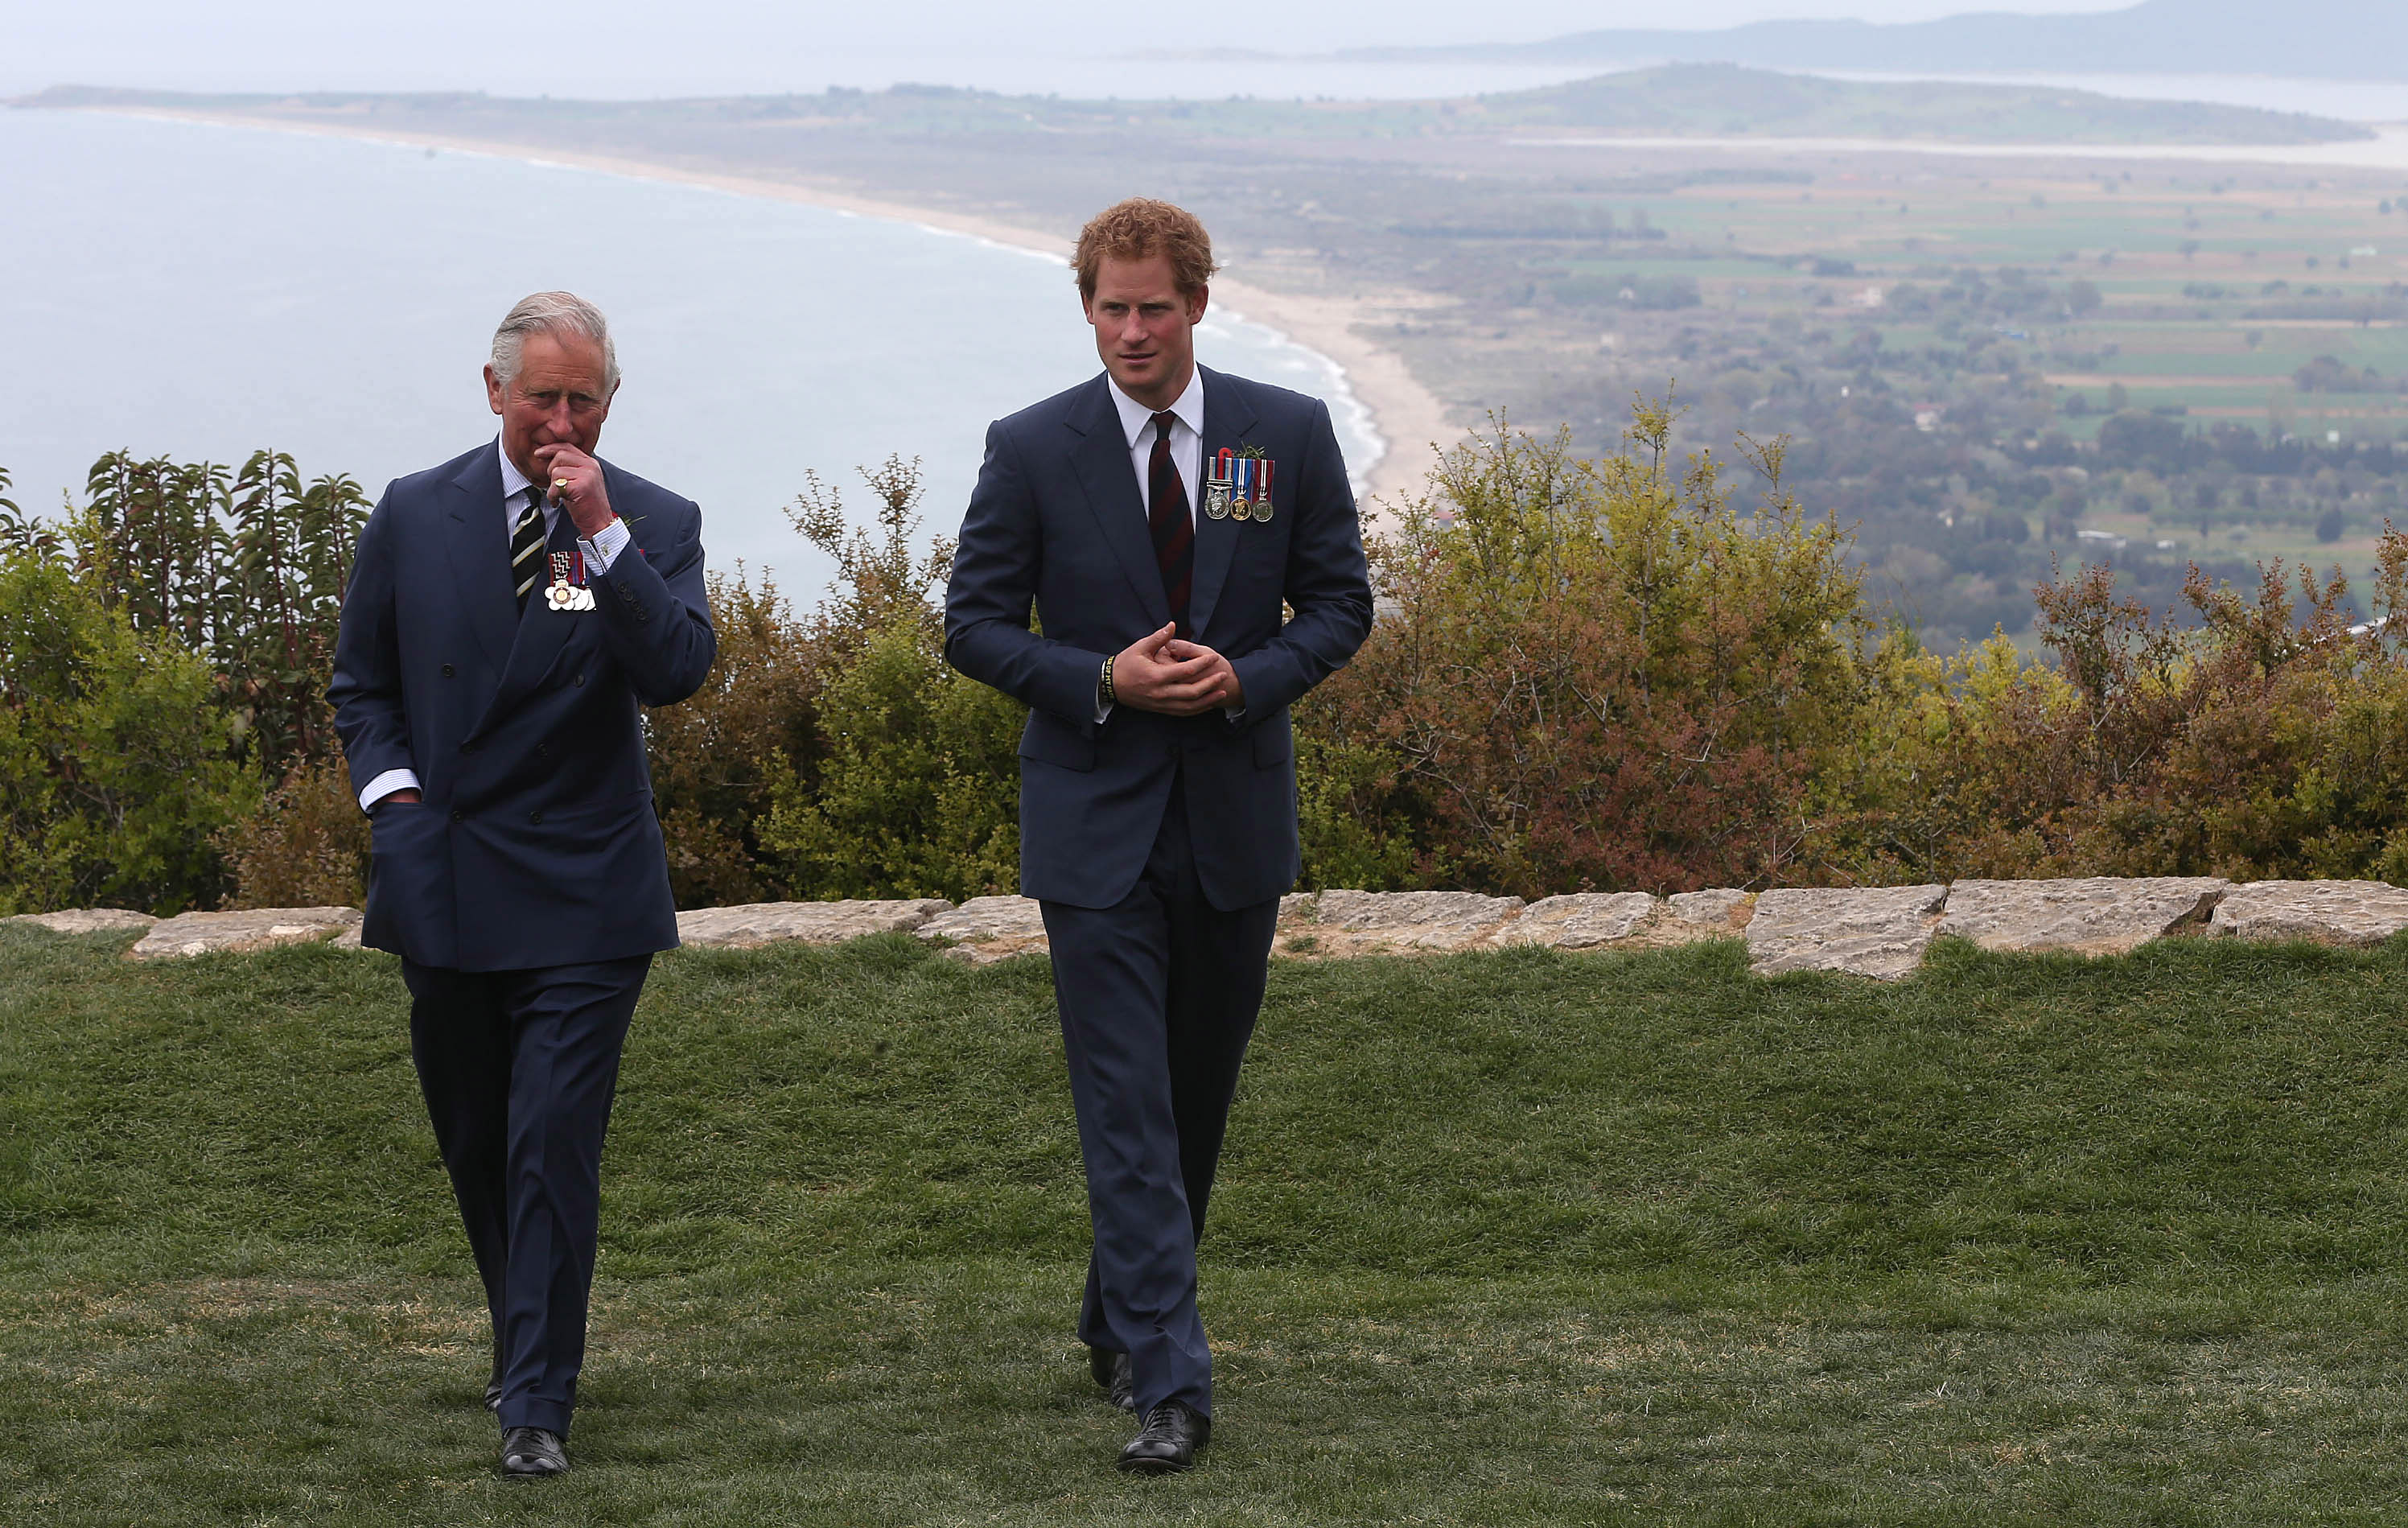 King Charles and Prince Harry during a visit to The Nek, a narrow stretch of ridge in the Anzac battlefield on the Gallipoli Peninsula on April 25, 2015 | Source: Getty Images